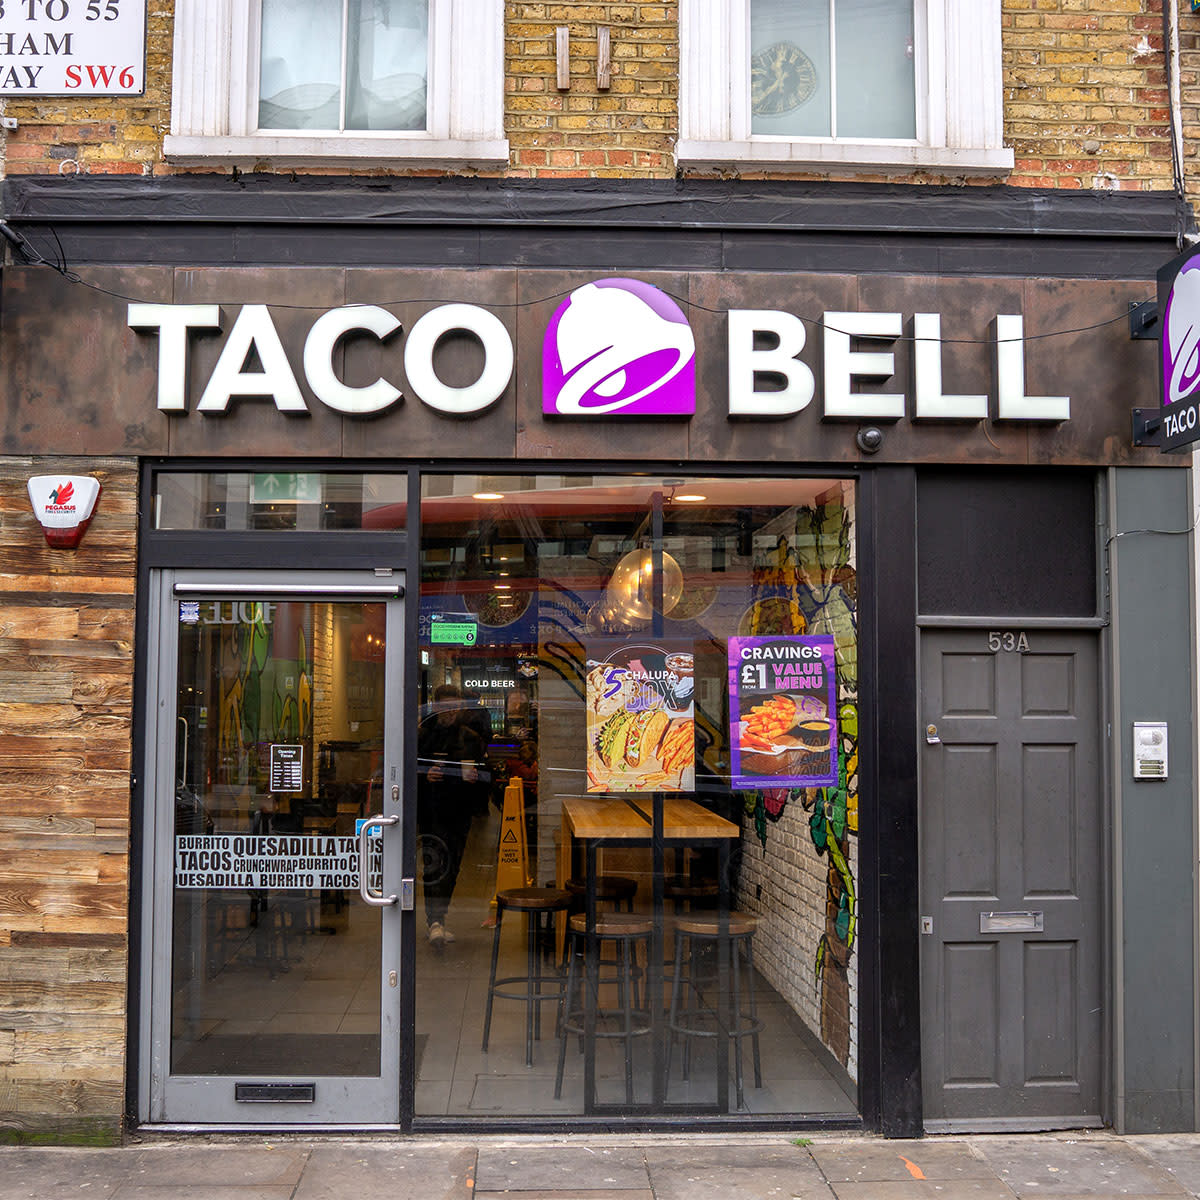 Taco Bell storefront exterior